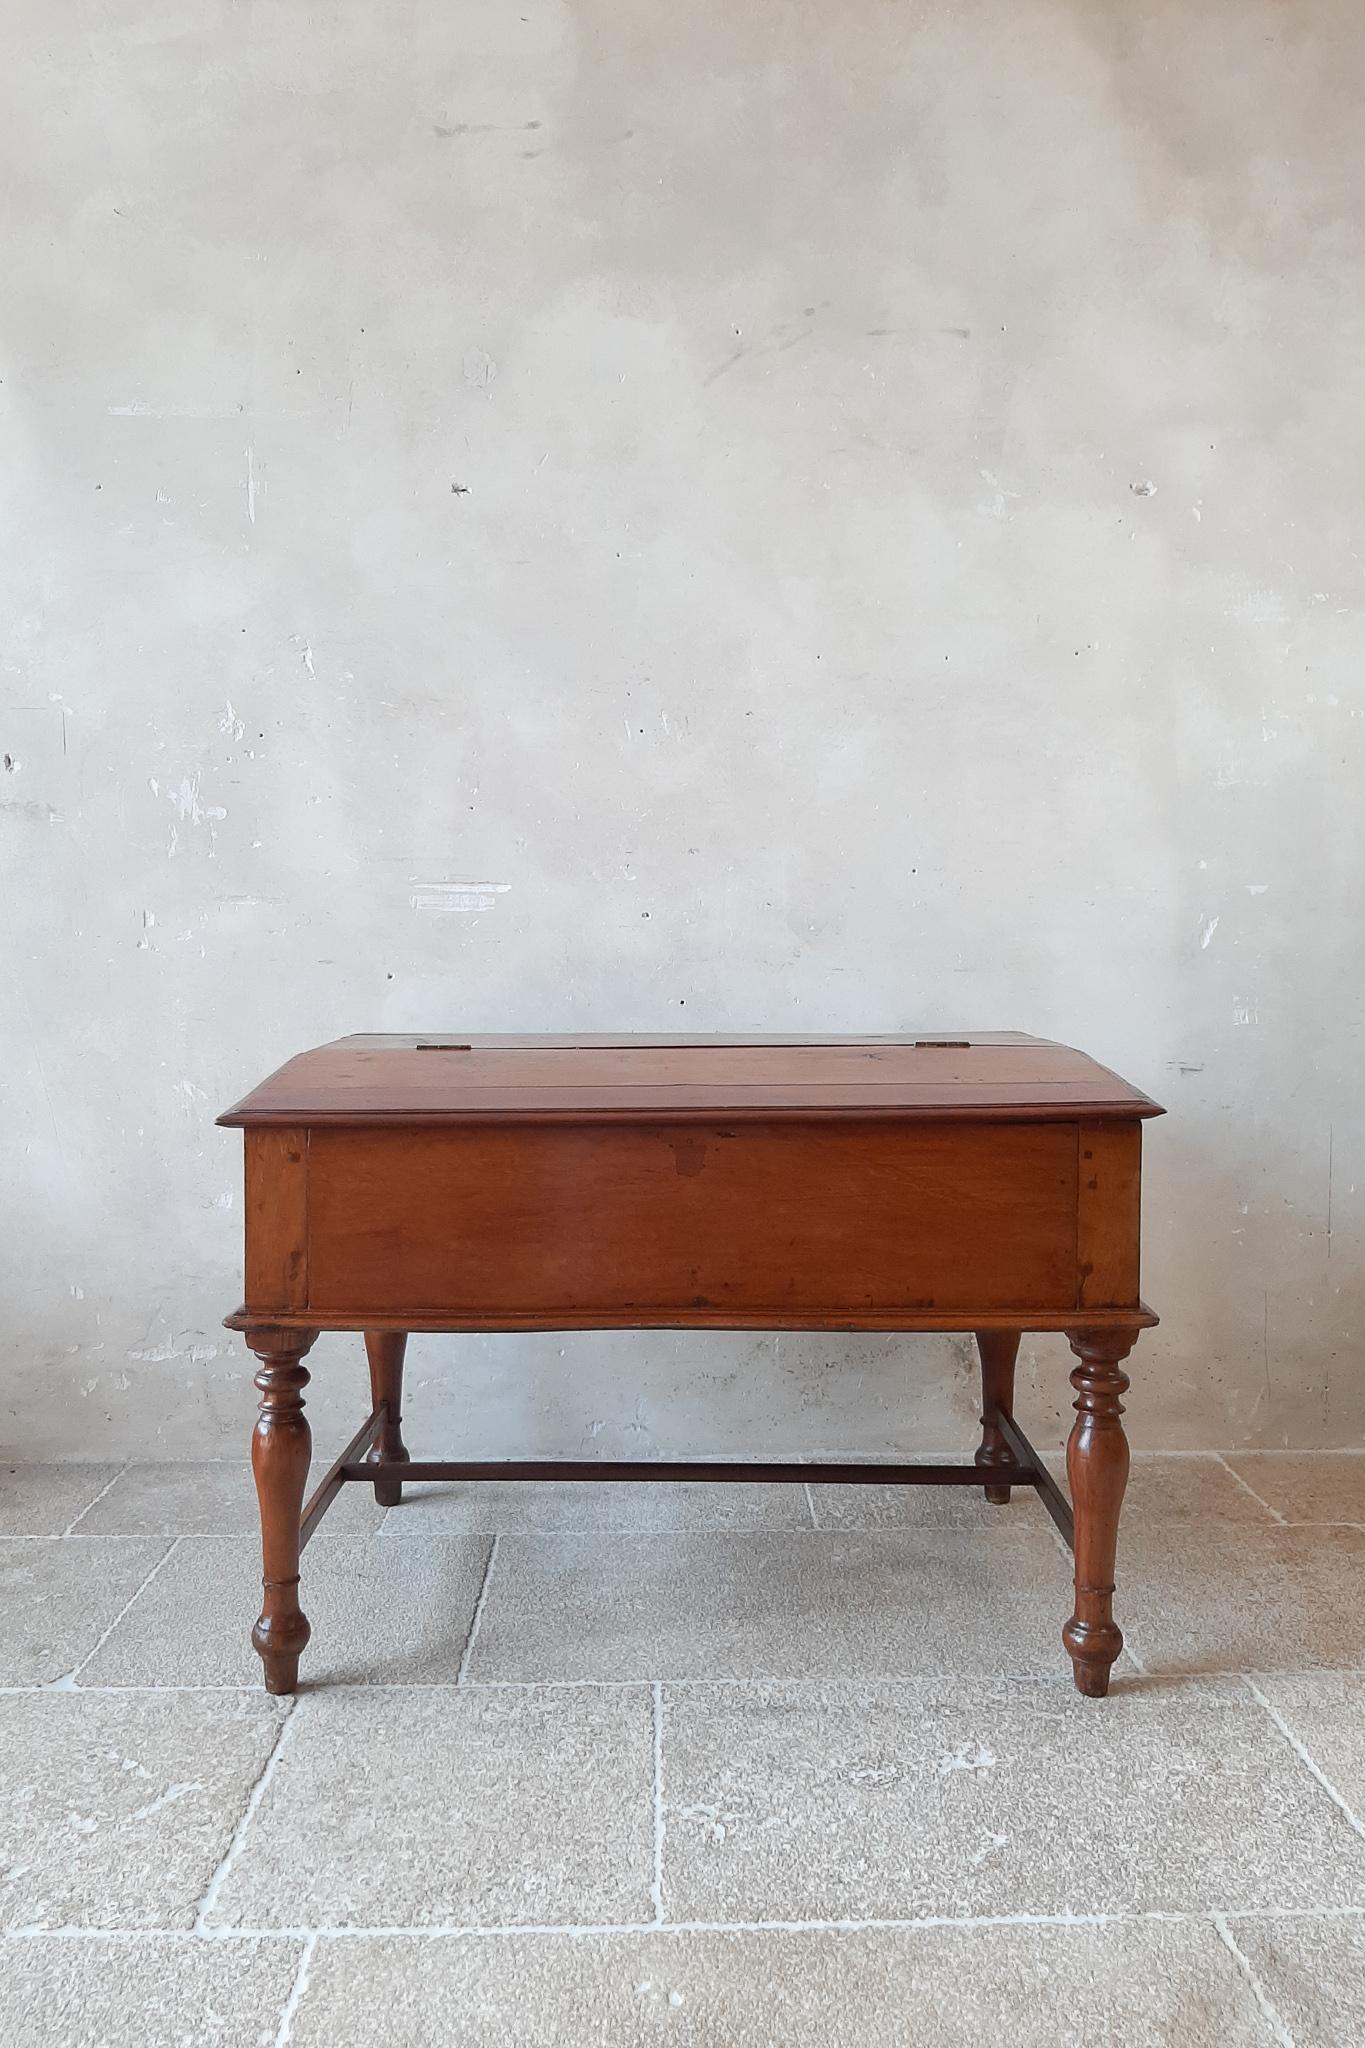 19th Century Antique French Mahogany Wooden Childrens Lift Top Writing Desk In Good Condition For Sale In Baambrugge, NL